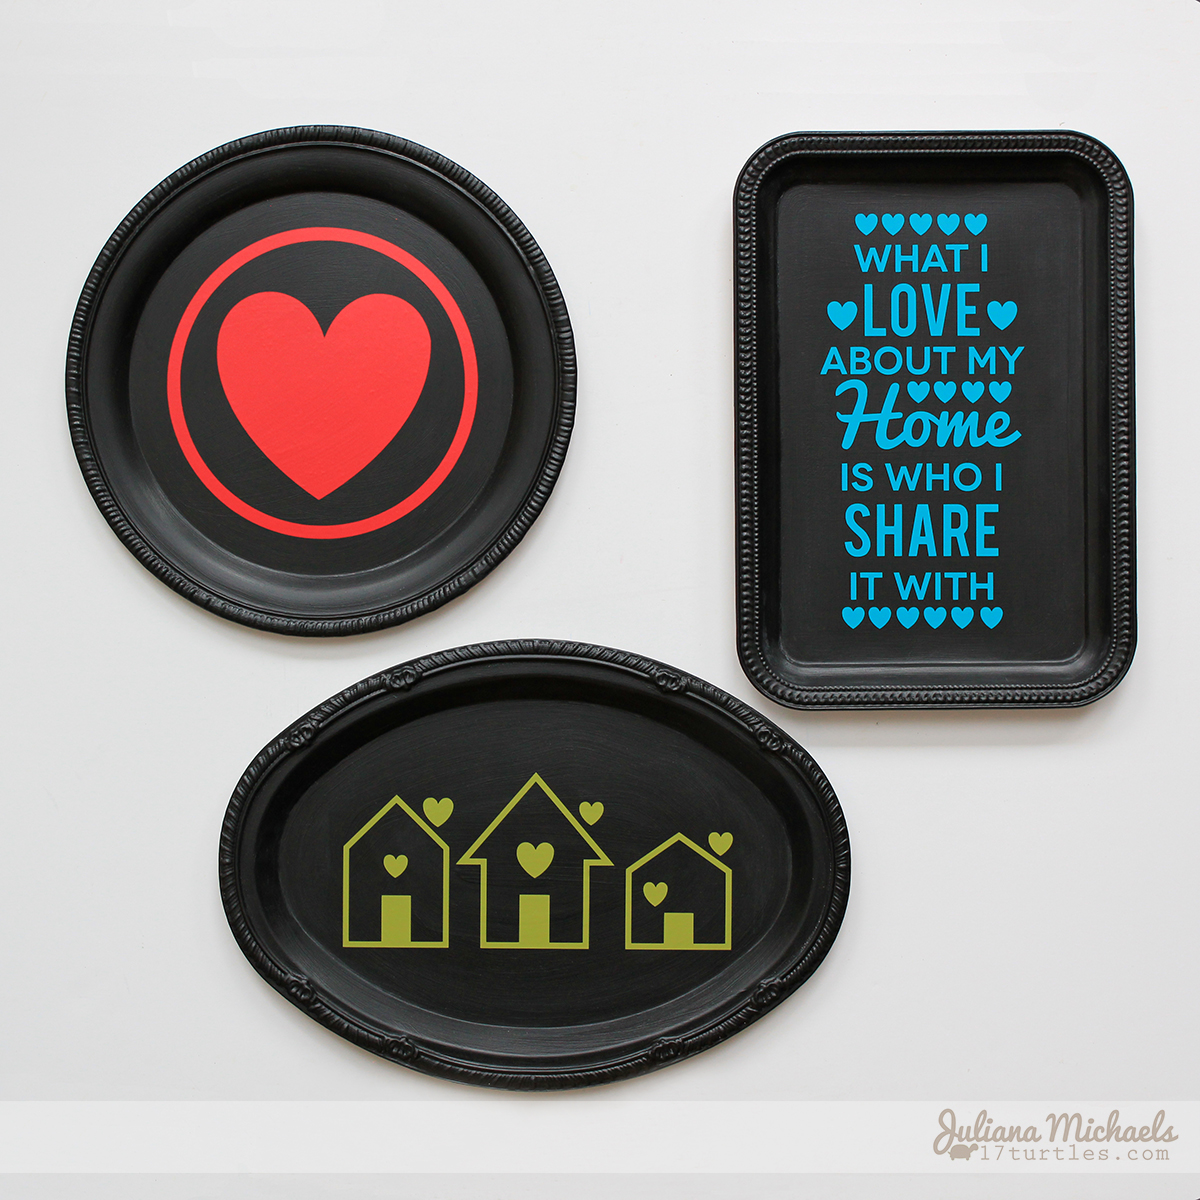 Dollar Tree Trays Wall Decor by Juliana Michaels featuring SRM Stickers Adhesive Vinyl 